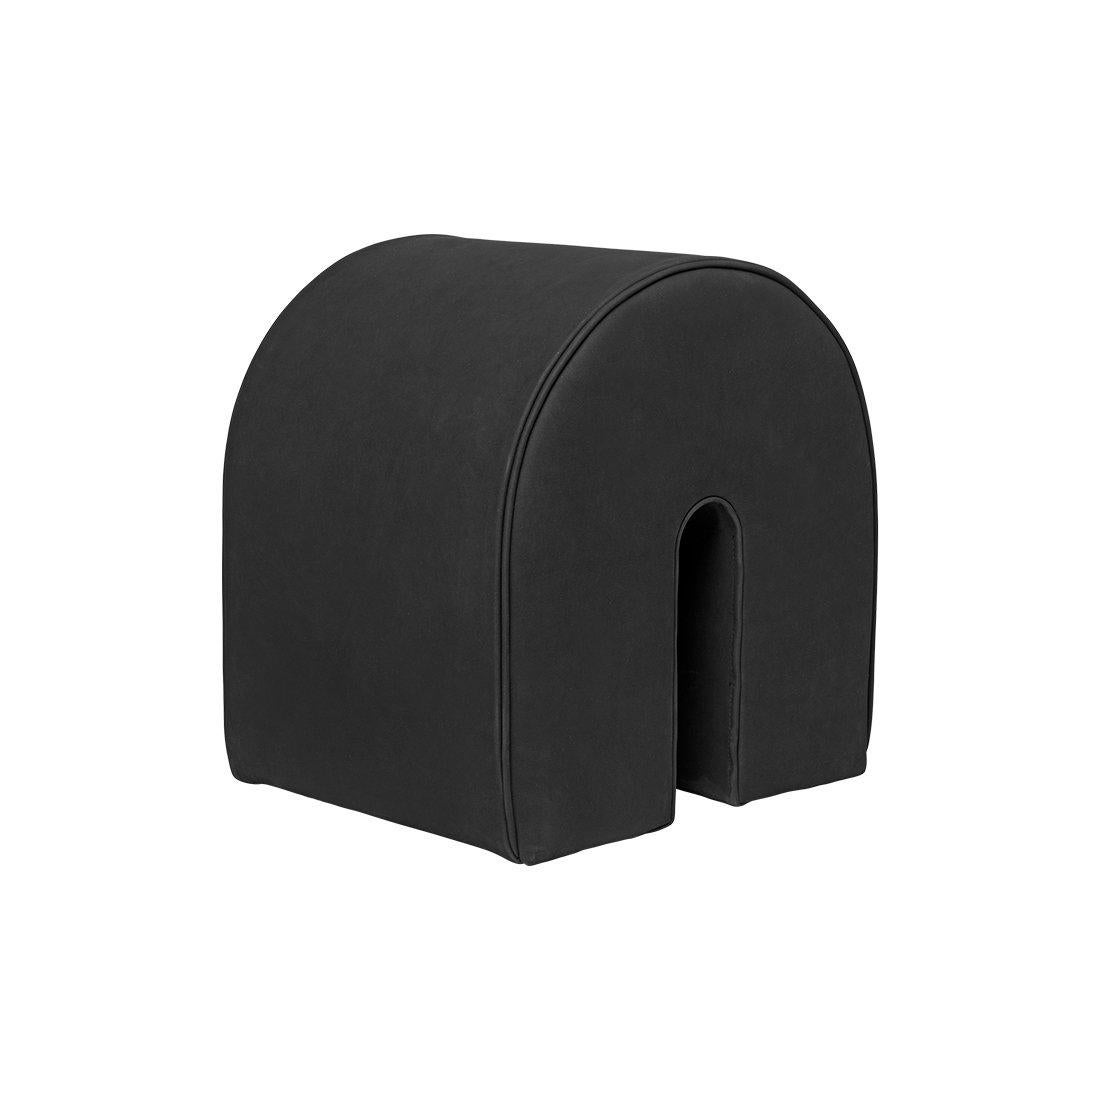 Black curved pouf by Kristina Dam Studio.
Materials: Black Aniline Nubuck. 
Also available in other colors. 
Dimensions: 36 x 42 x H 42cm.

The Modernist furniture collection takes notions of modern design and yet the distinctive design touch